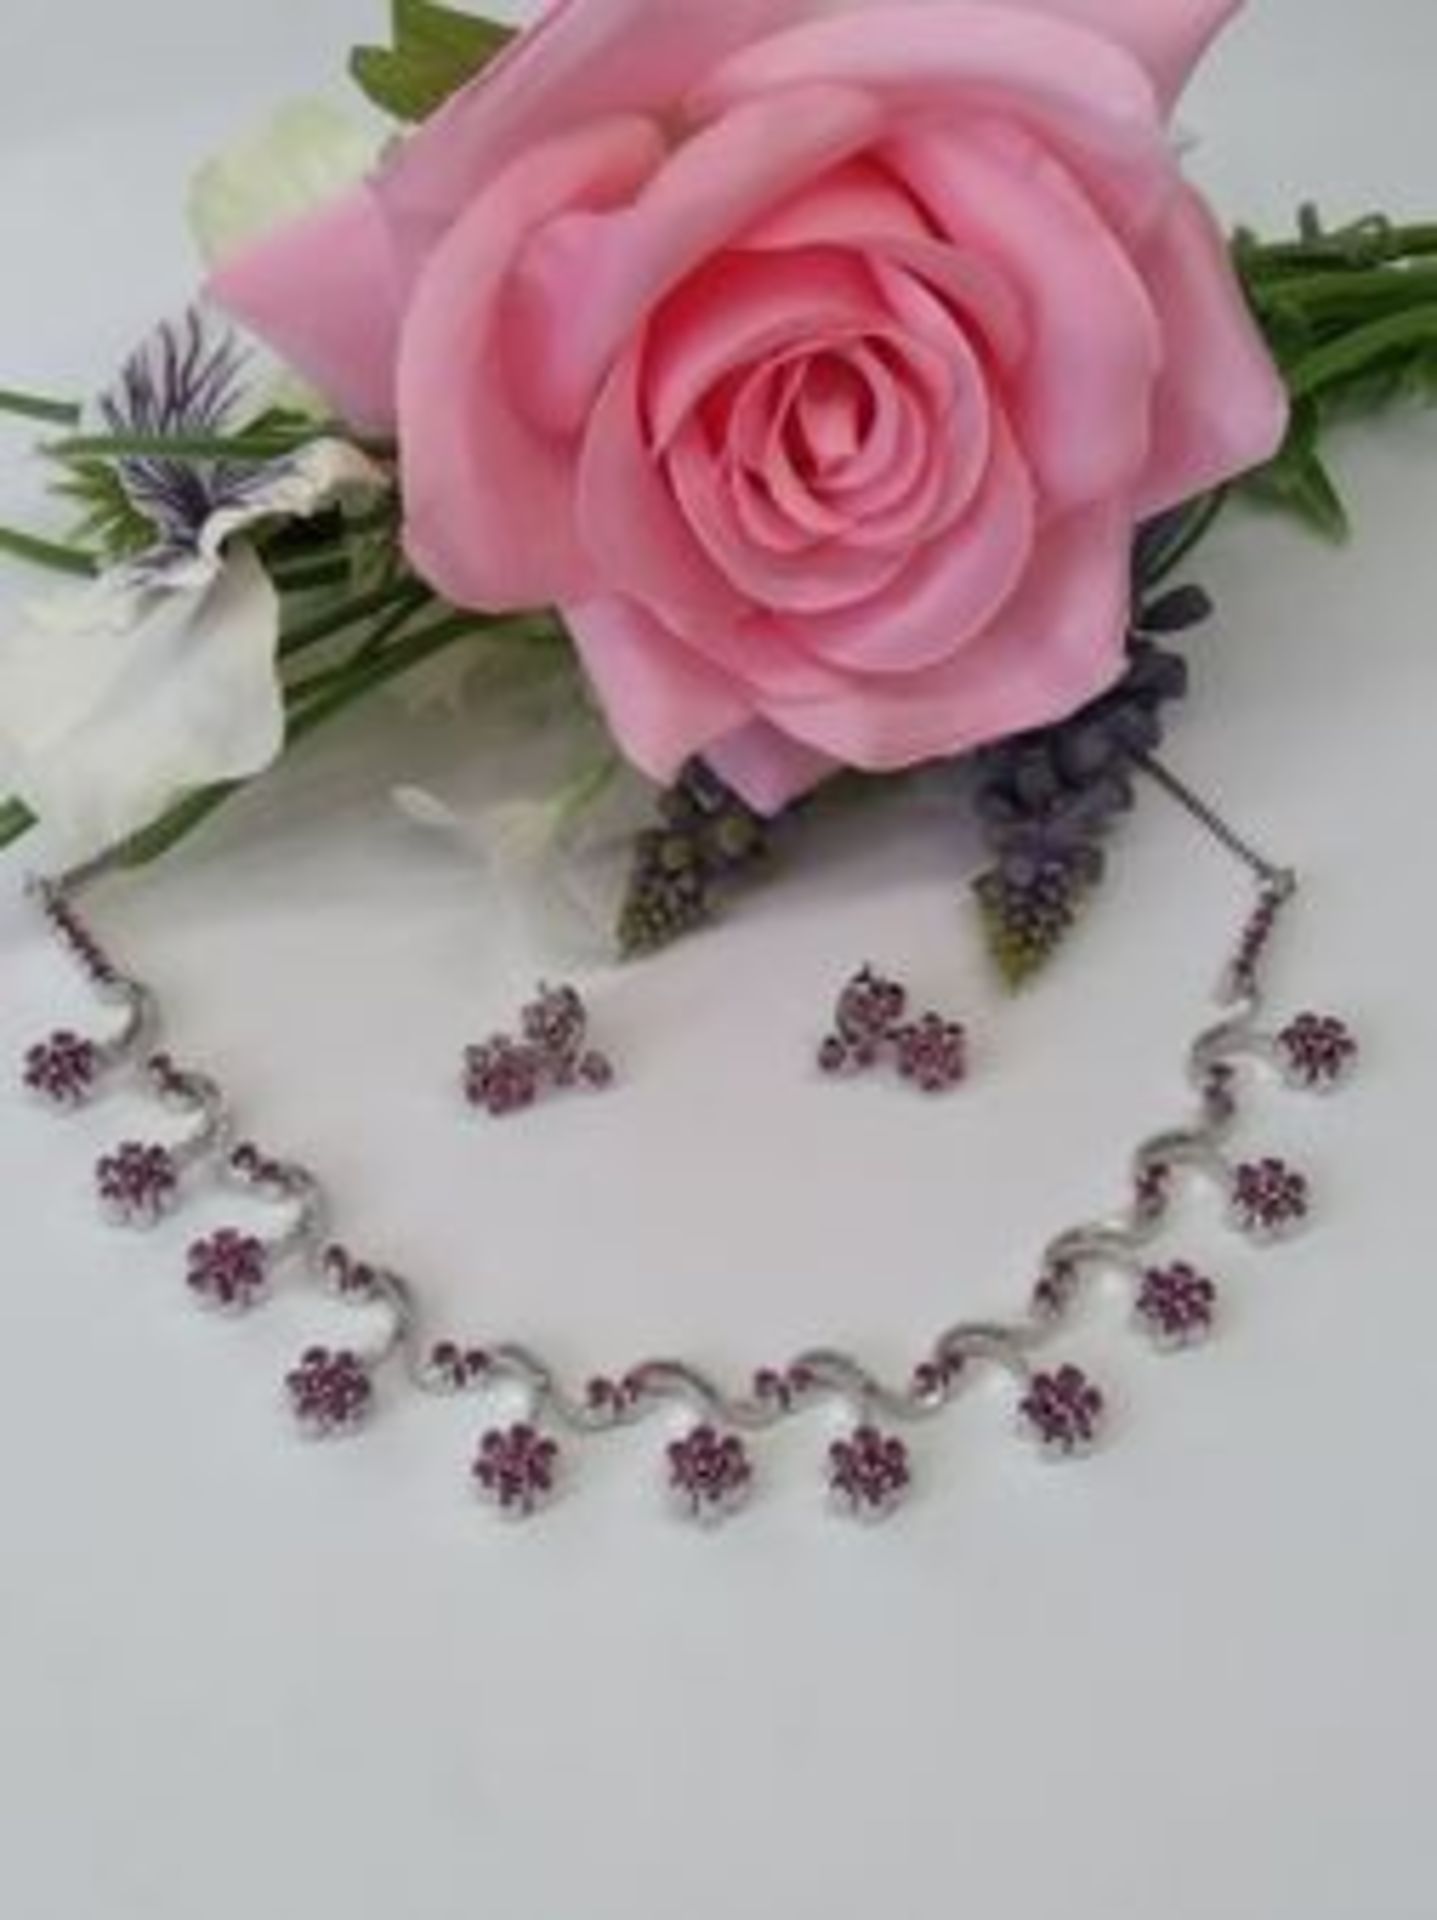 AGI Certified Stunning Natural Untreated 131 Rubies Necklace & Earrings: Commissioned Hand Made.